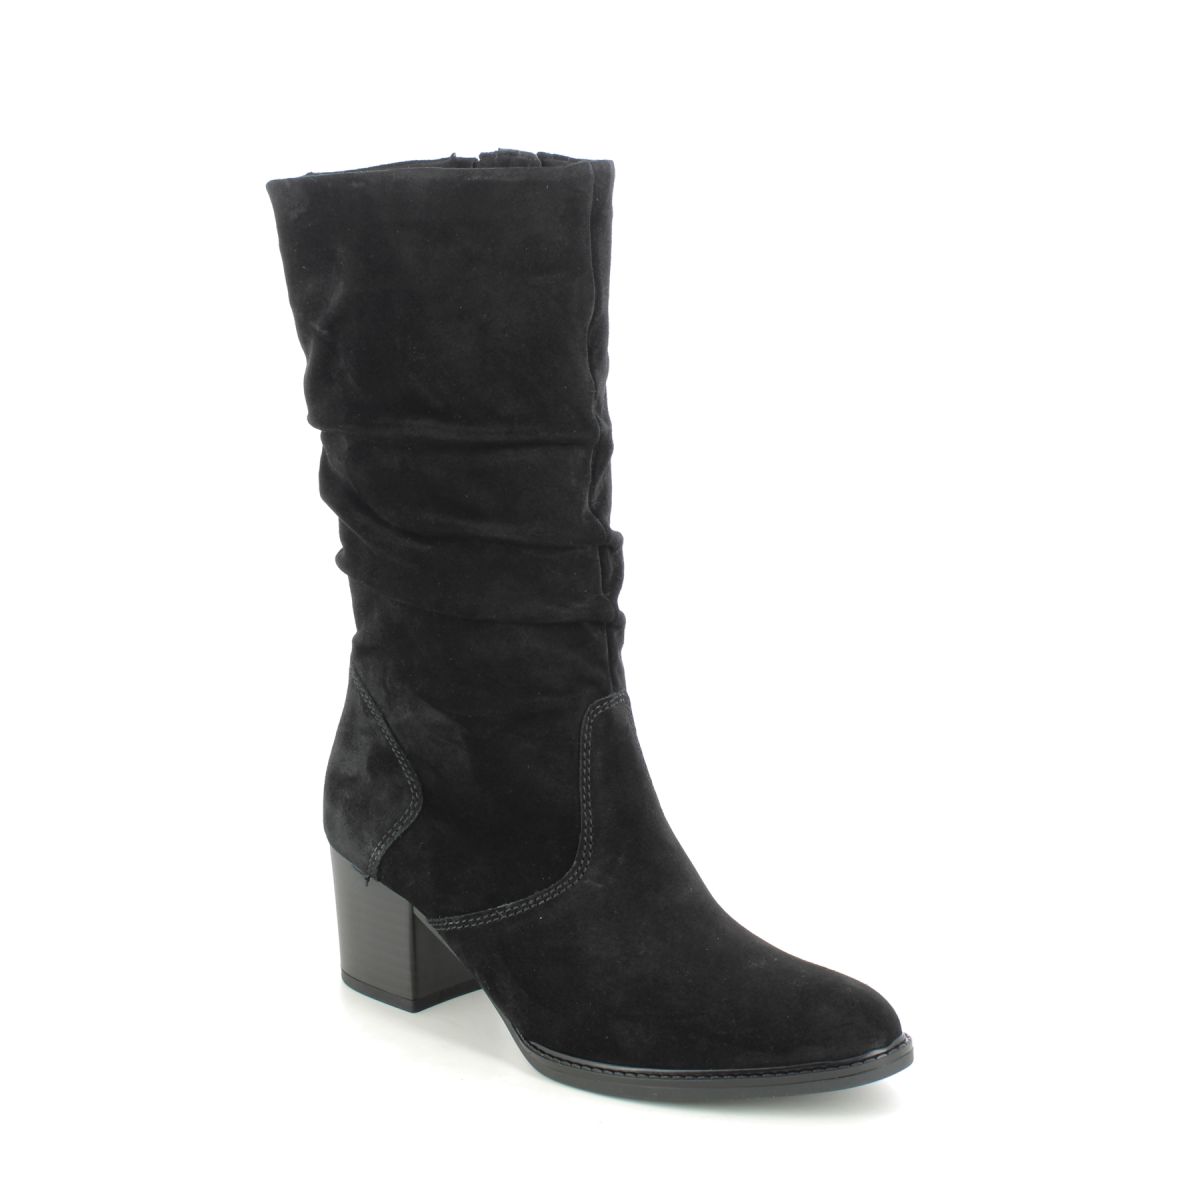 Gabor Ramona Black Suede Womens Mid Calf Boots 32.894.47 in a Plain Leather in Size 7